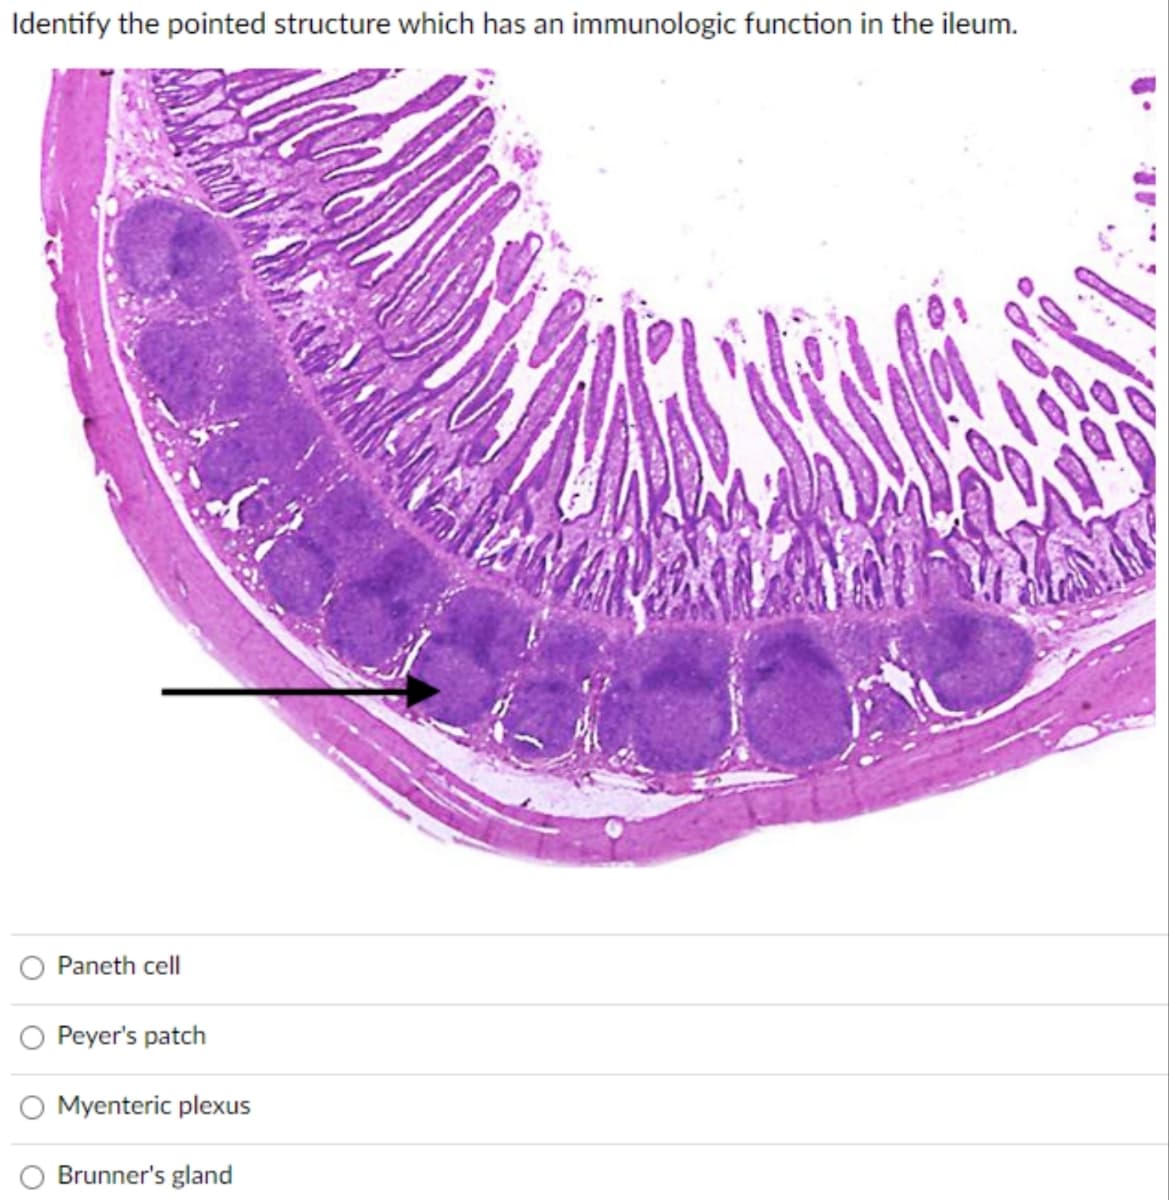 Identify the pointed structure which has an immunologic function in the ileum.
Paneth cell
Peyer's patch
Myenteric plexus
Brunner's gland